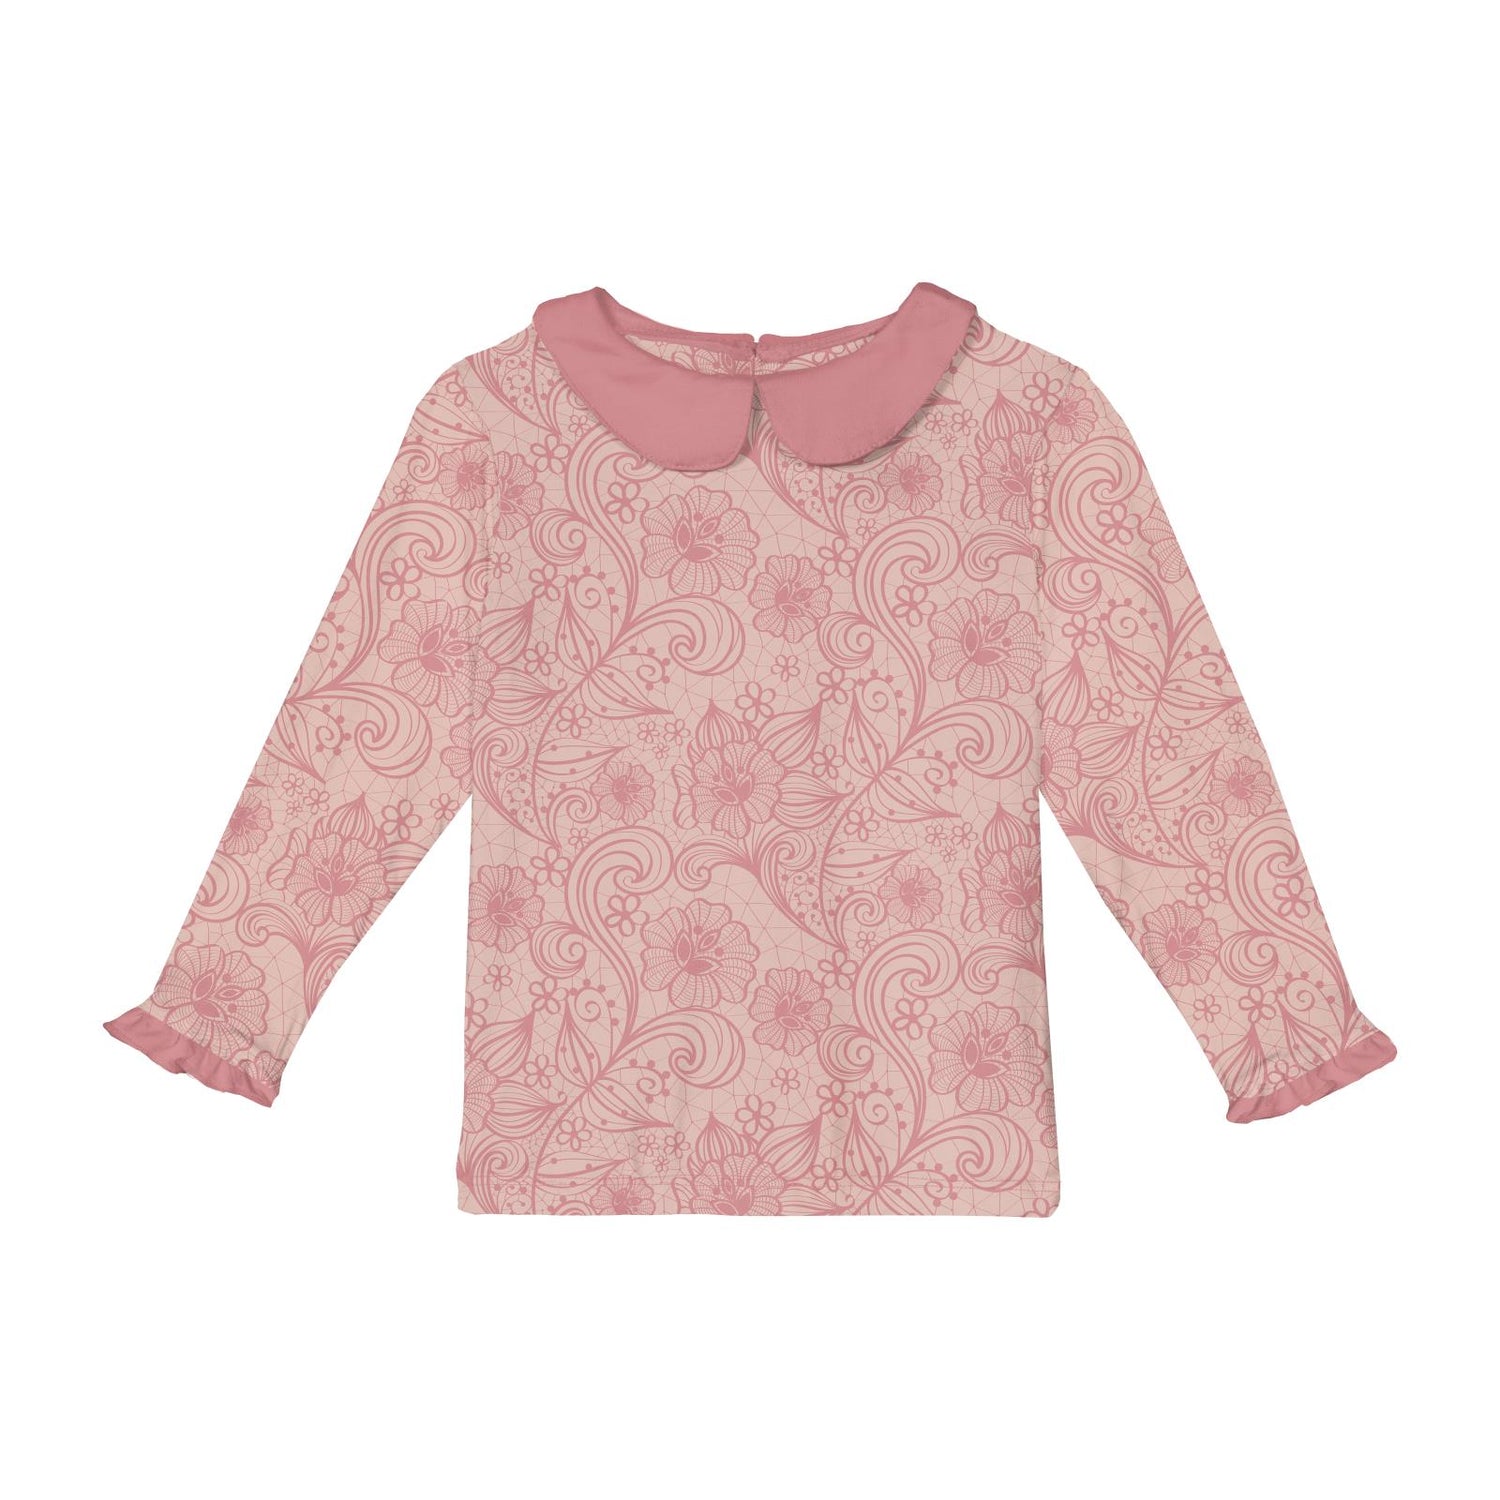 Print Long Sleeve Peter Pan Collared Tee in Peach Blossom Lace